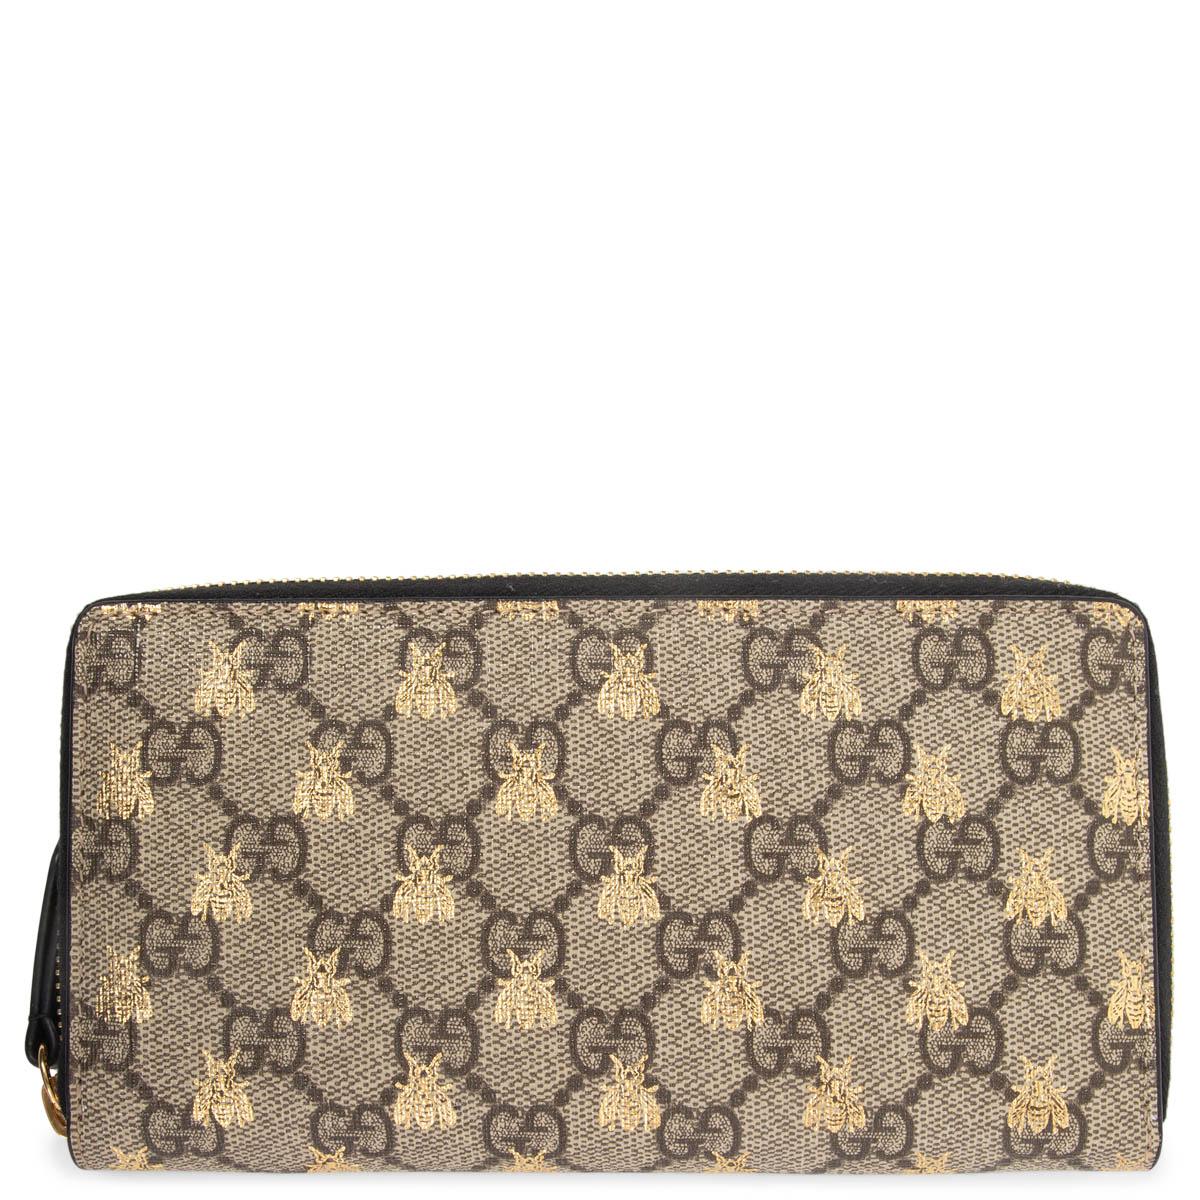 100% authentic Gucci Bees zip around wallet in beige and ebony monogram GG Supreme canvas with metalic gold bee print. Lined in black leather with 12 credit card slots, a zip pocket for coins and three full-size compartements. Has been carried and